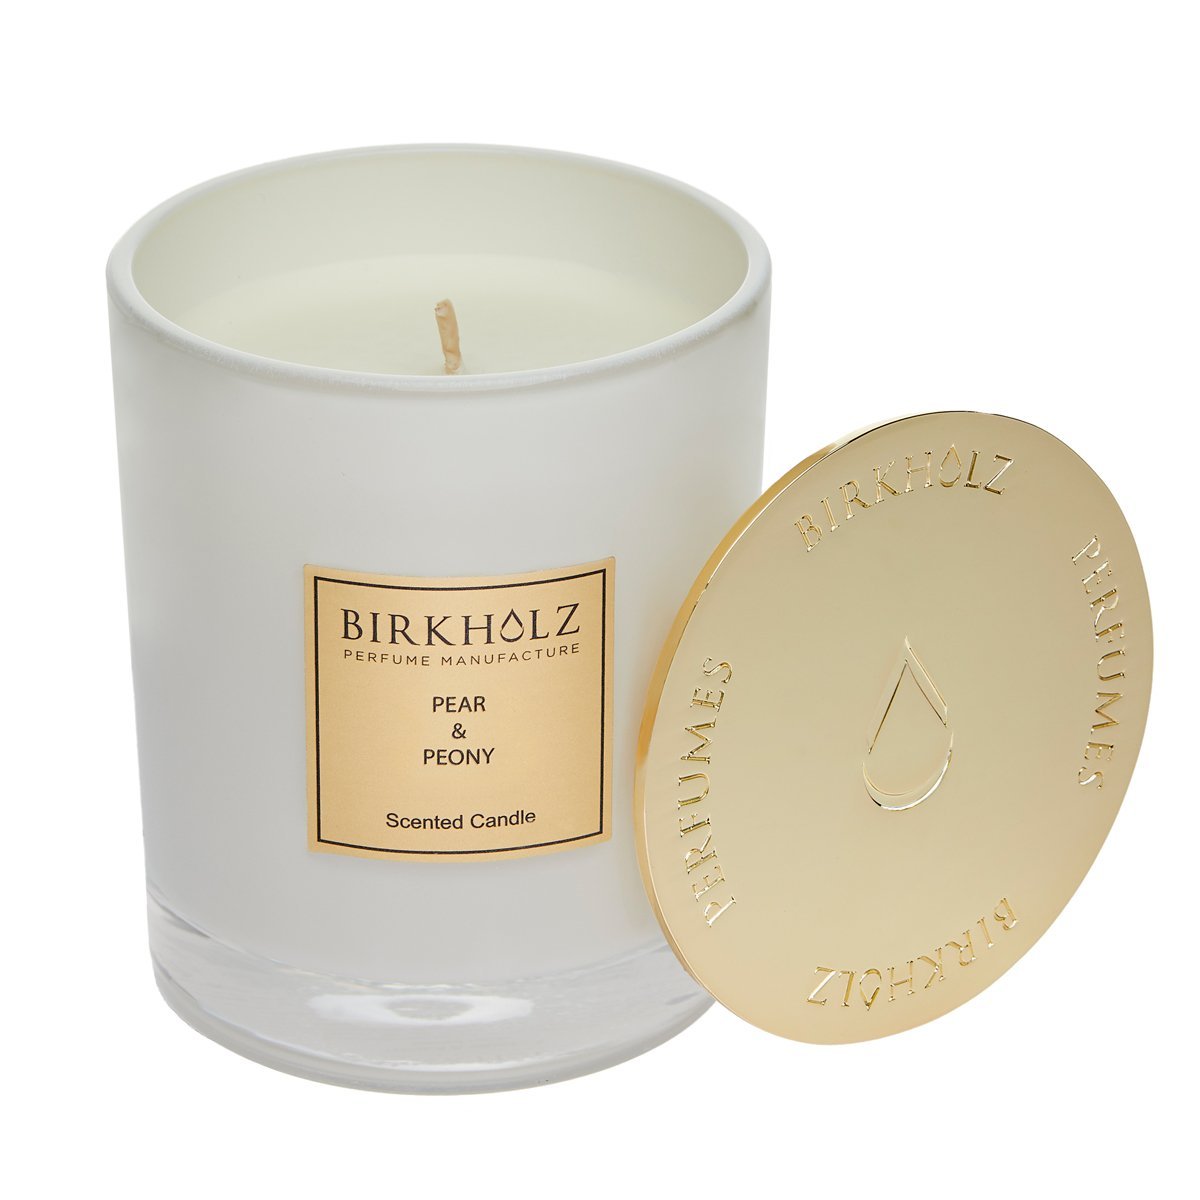 Scented Candle Pear & Peony - Birkholz Perfume Manufacture